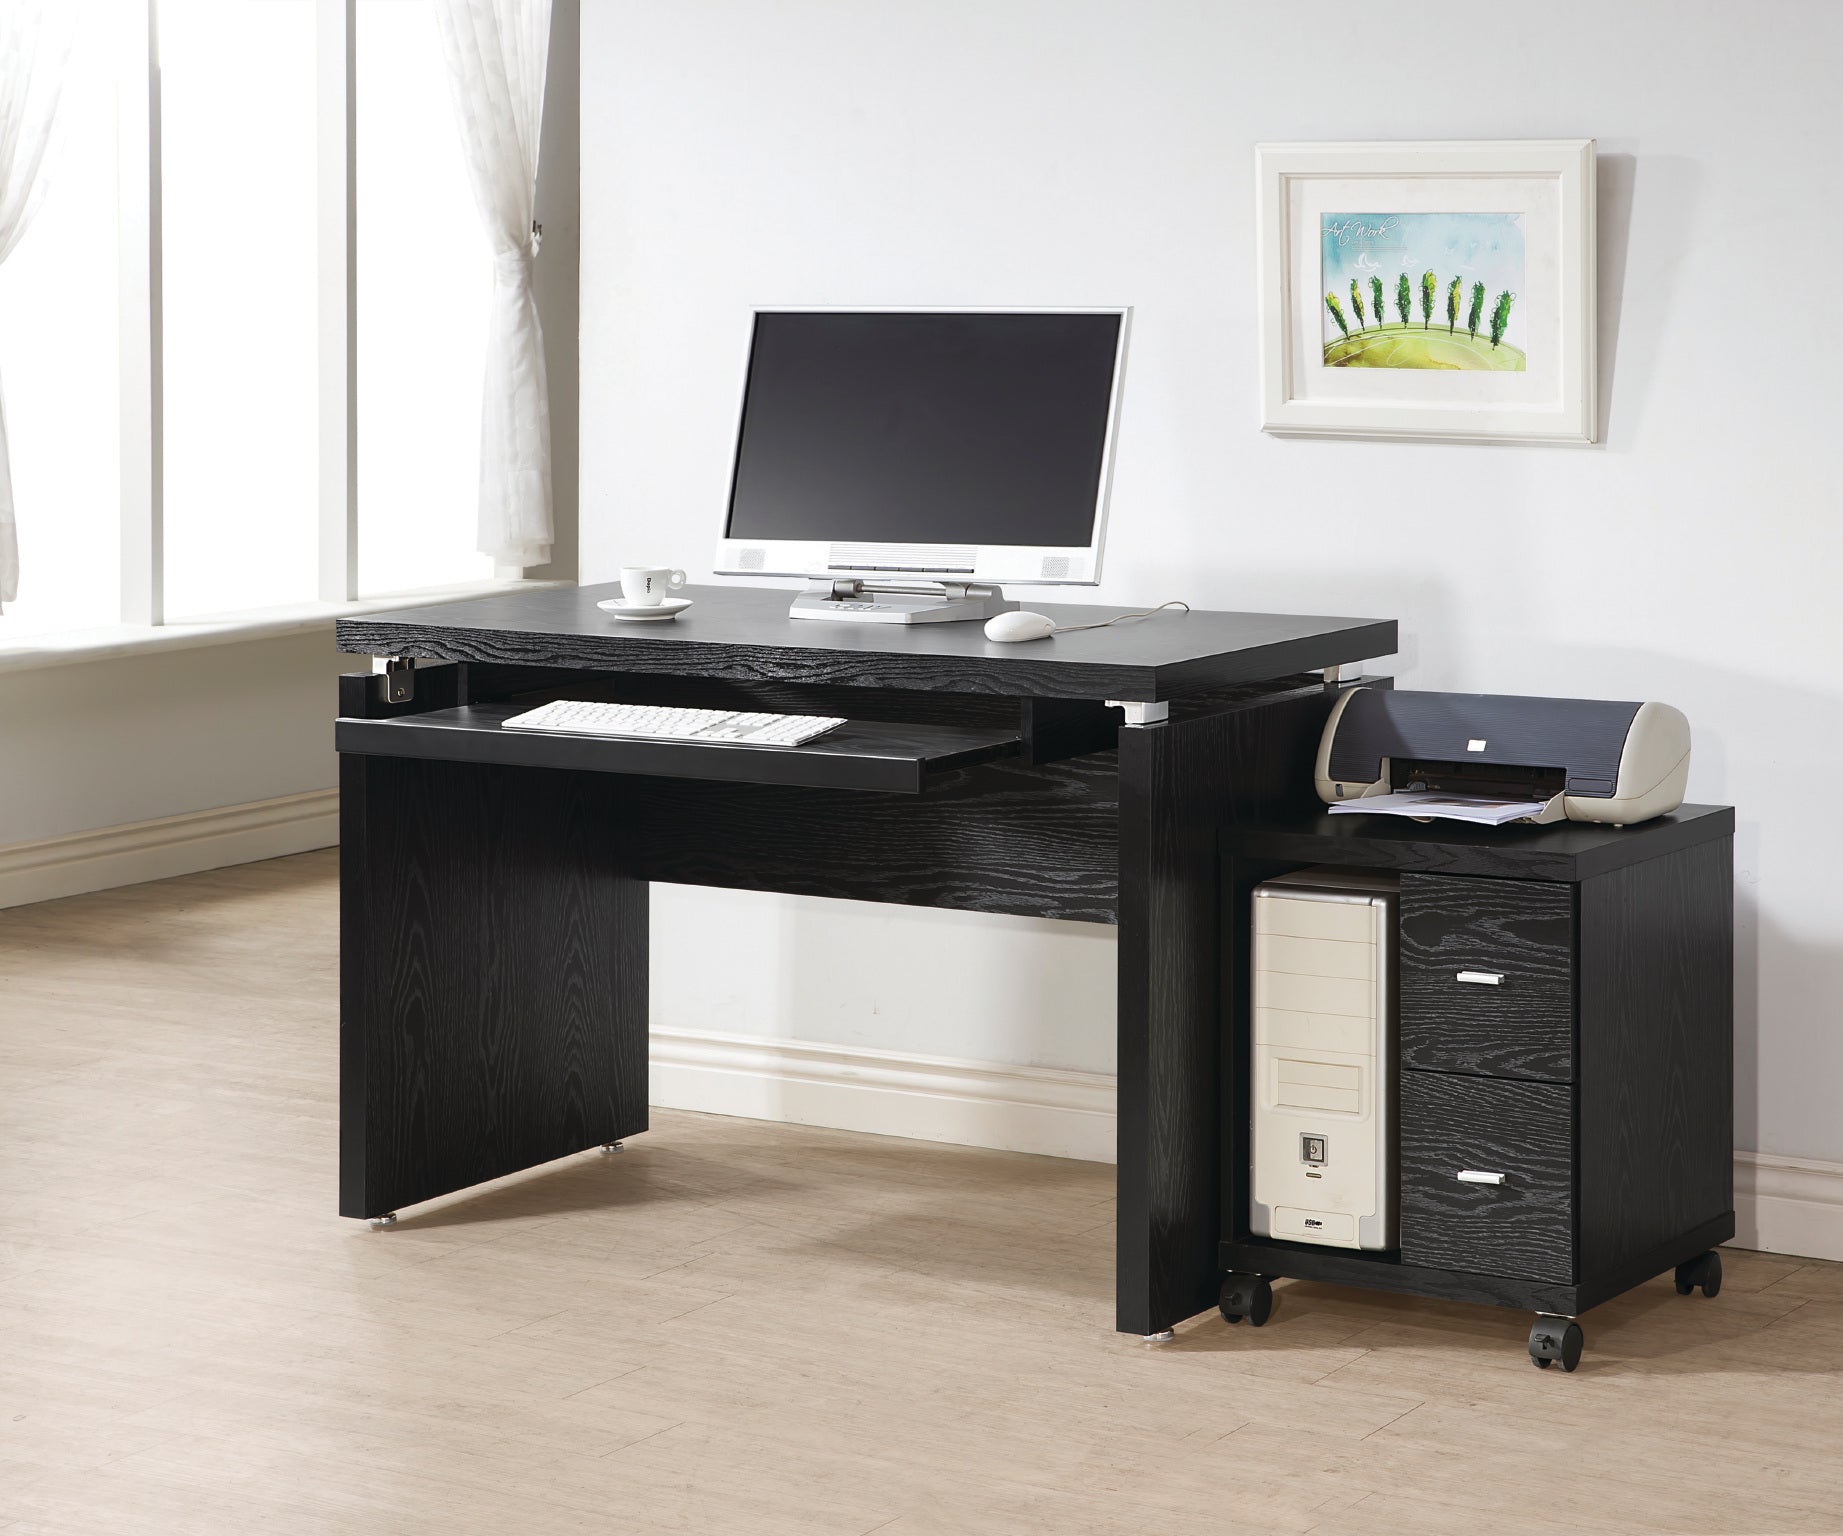 OF6387 - Office Desk and Mobile CPU Stand